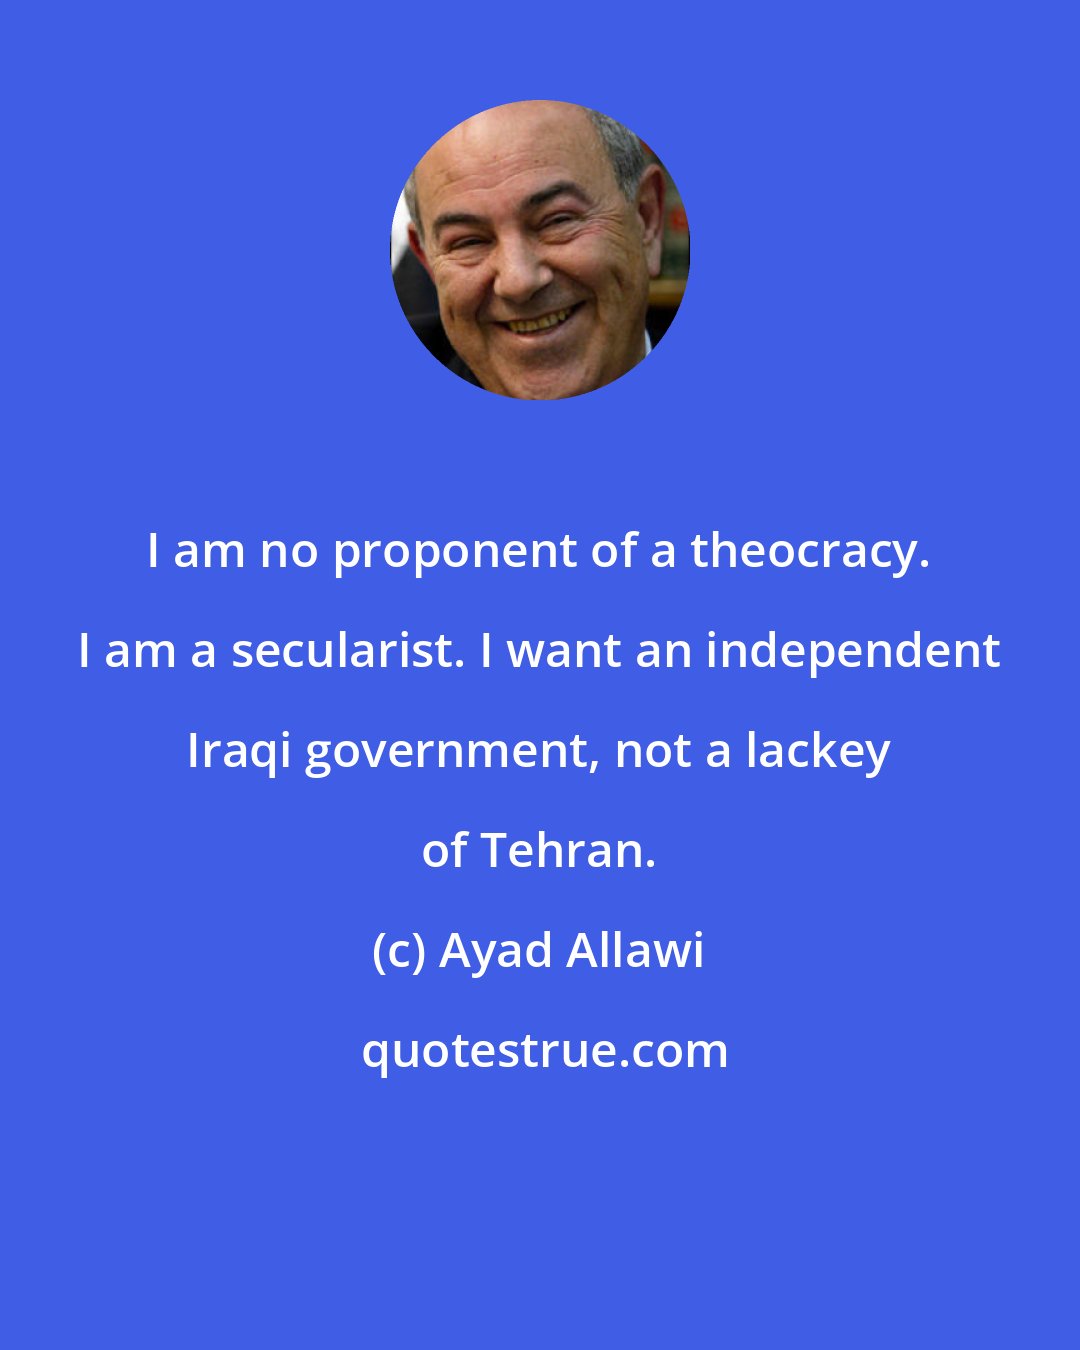 Ayad Allawi: I am no proponent of a theocracy. I am a secularist. I want an independent Iraqi government, not a lackey of Tehran.